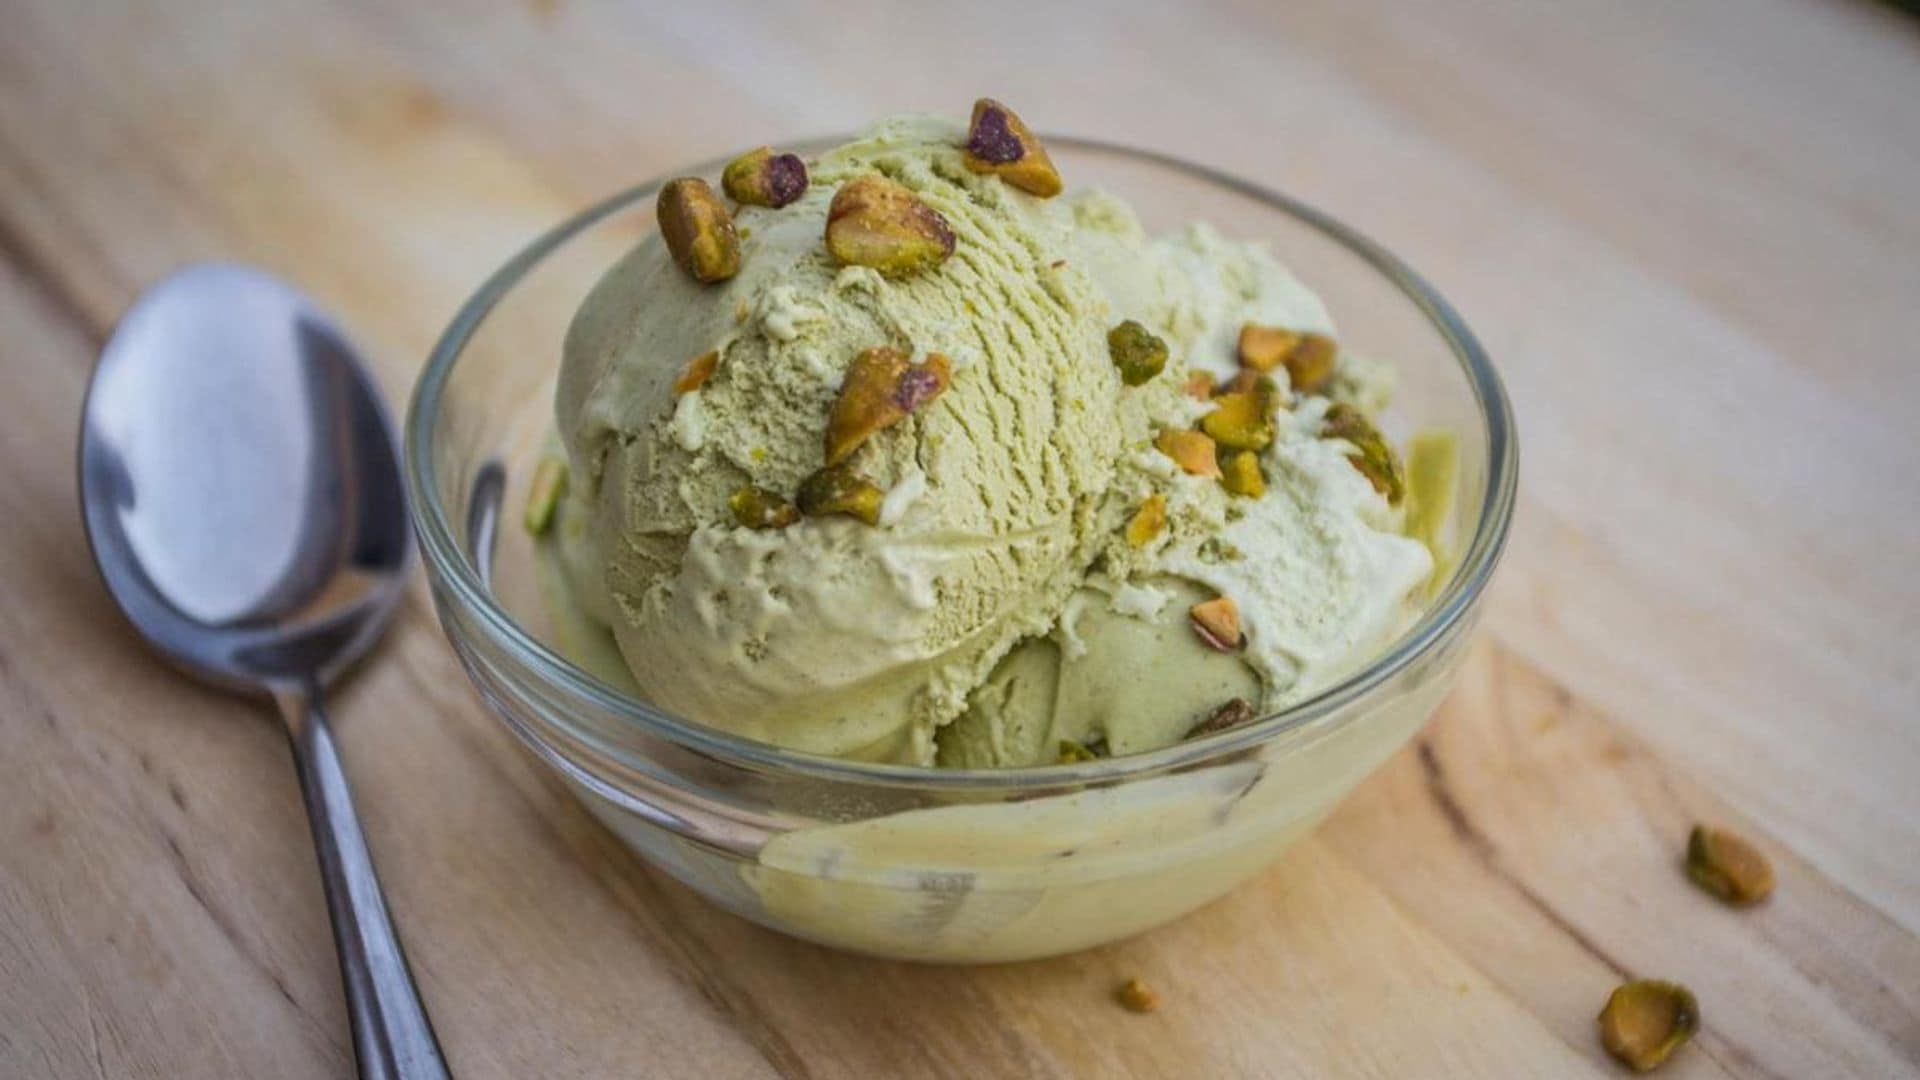 Avocado ice cream? Learn how to make this dietitian-approved and dairy-free treat